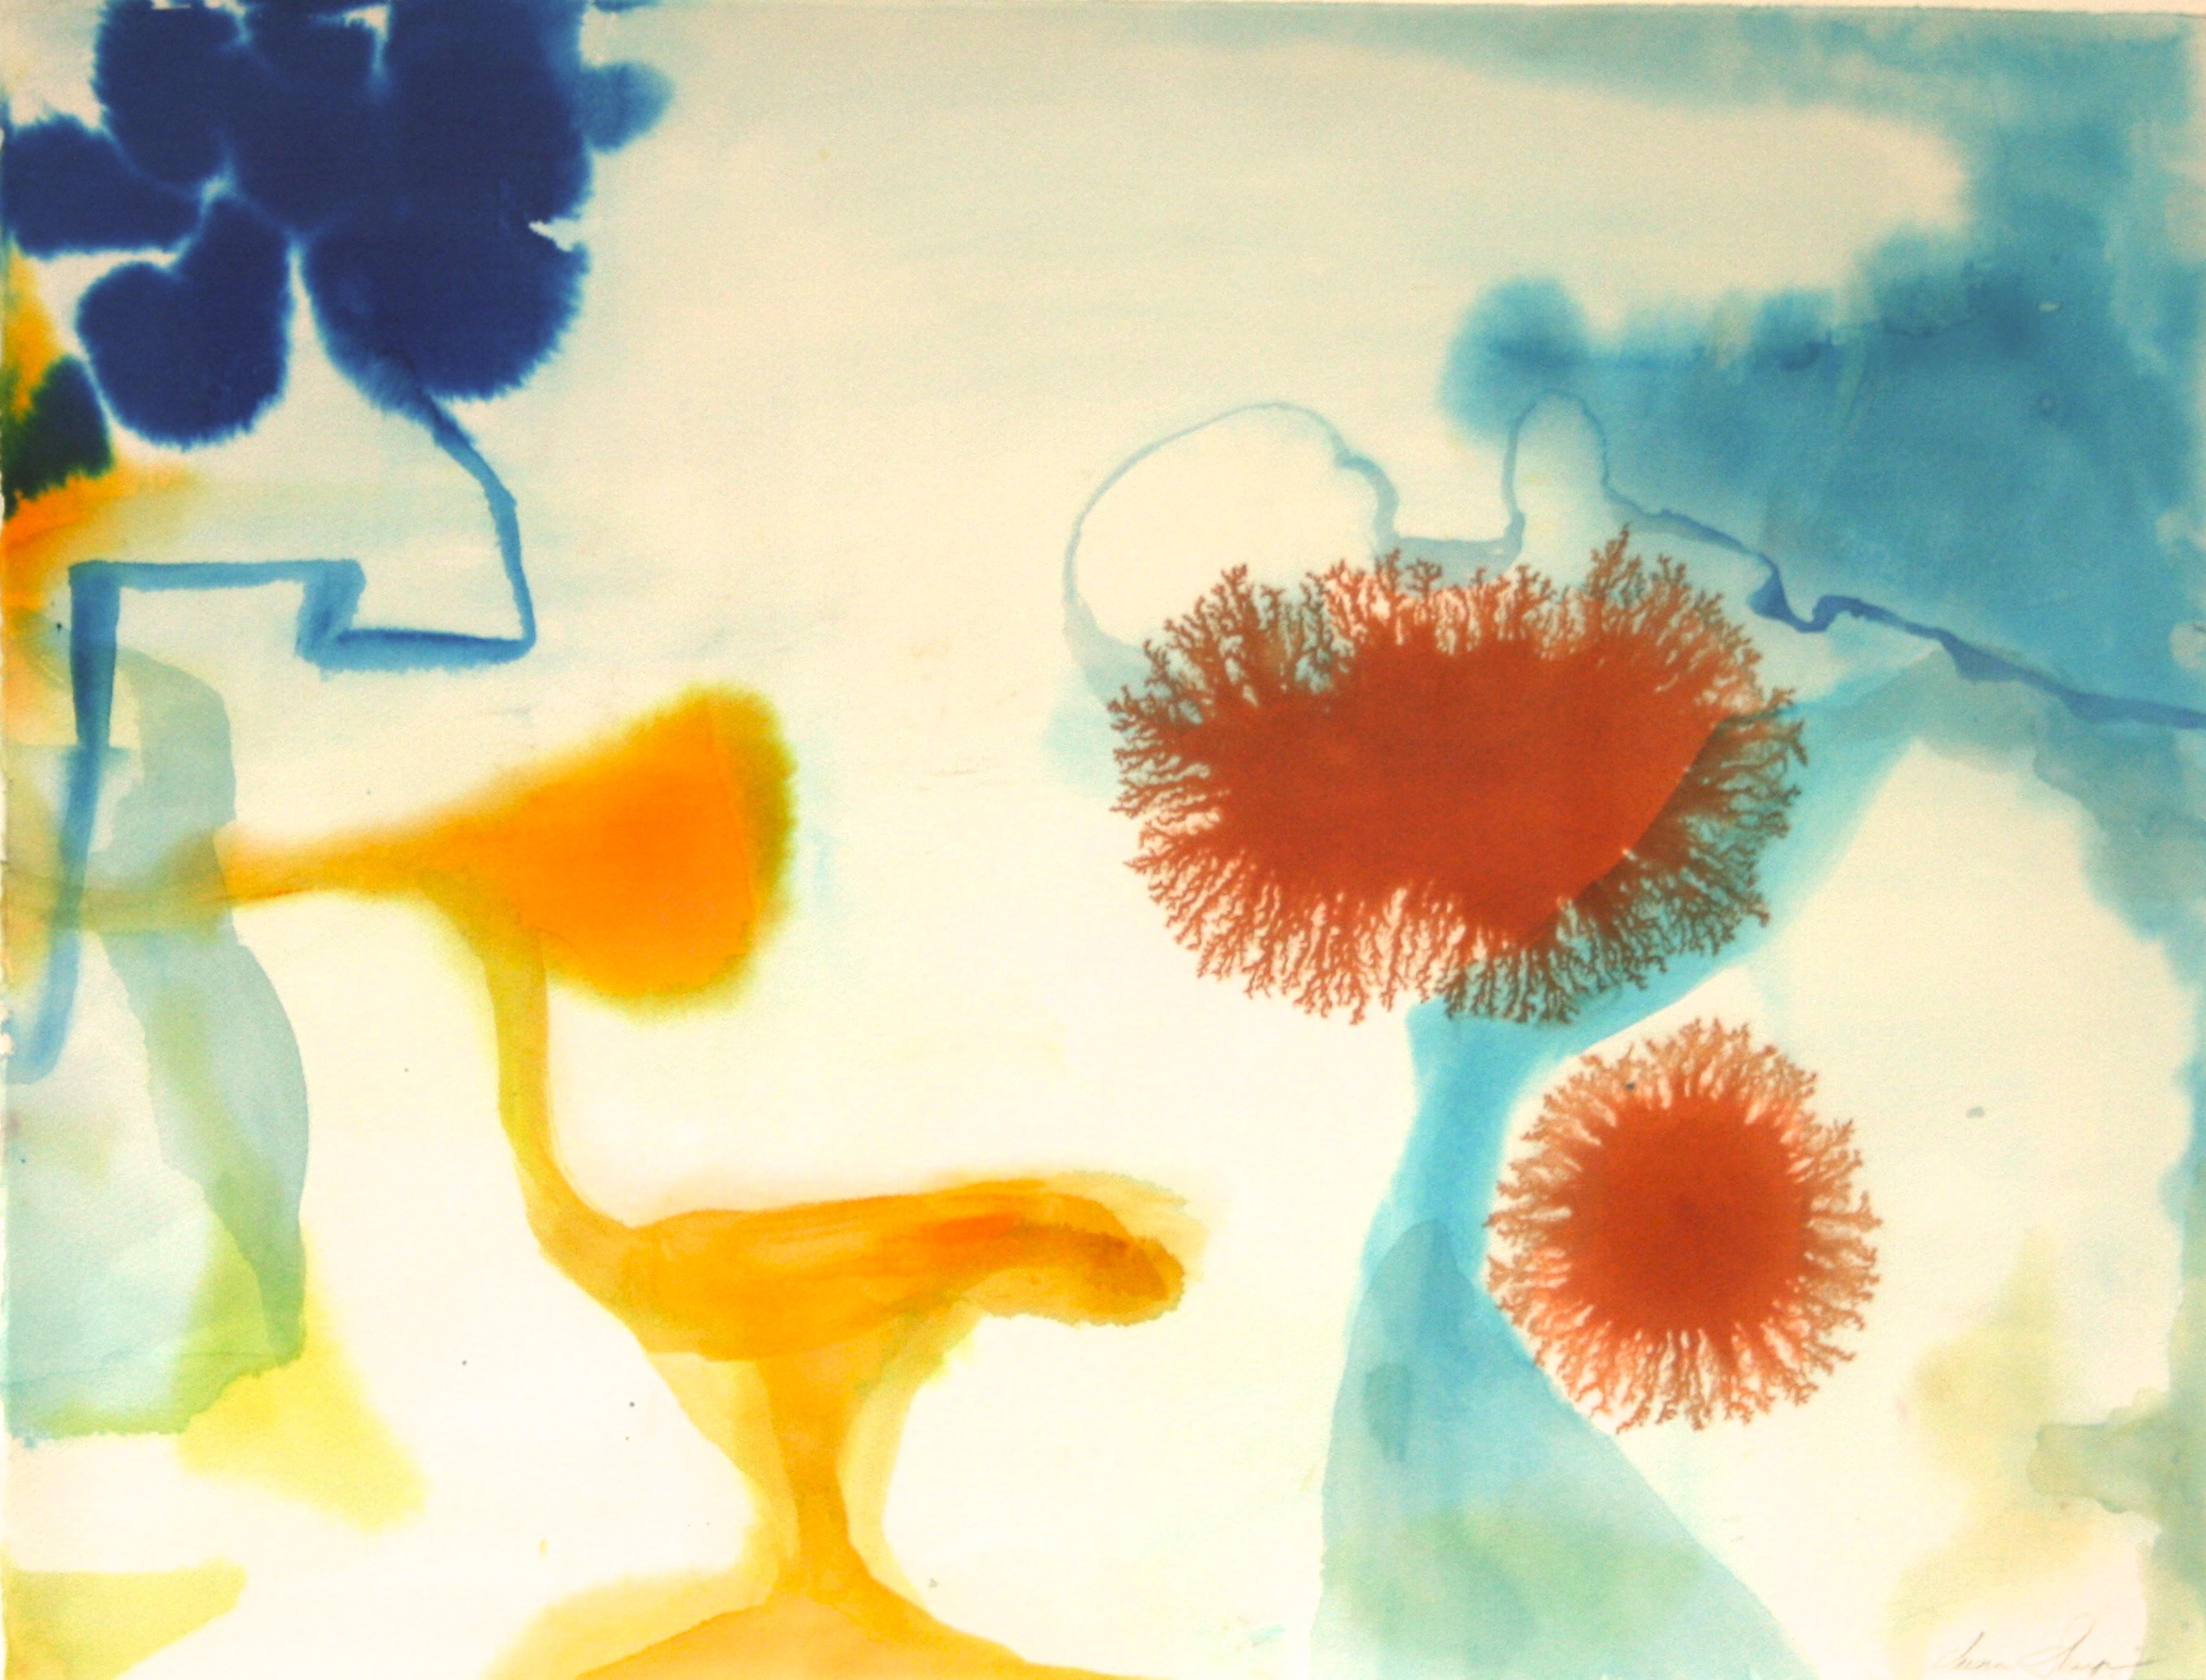 Susan Sharp Abstract Drawing - "Aerial #10"   Biomorphic, fluid abstraction in blue, rust, yellow and turquoise